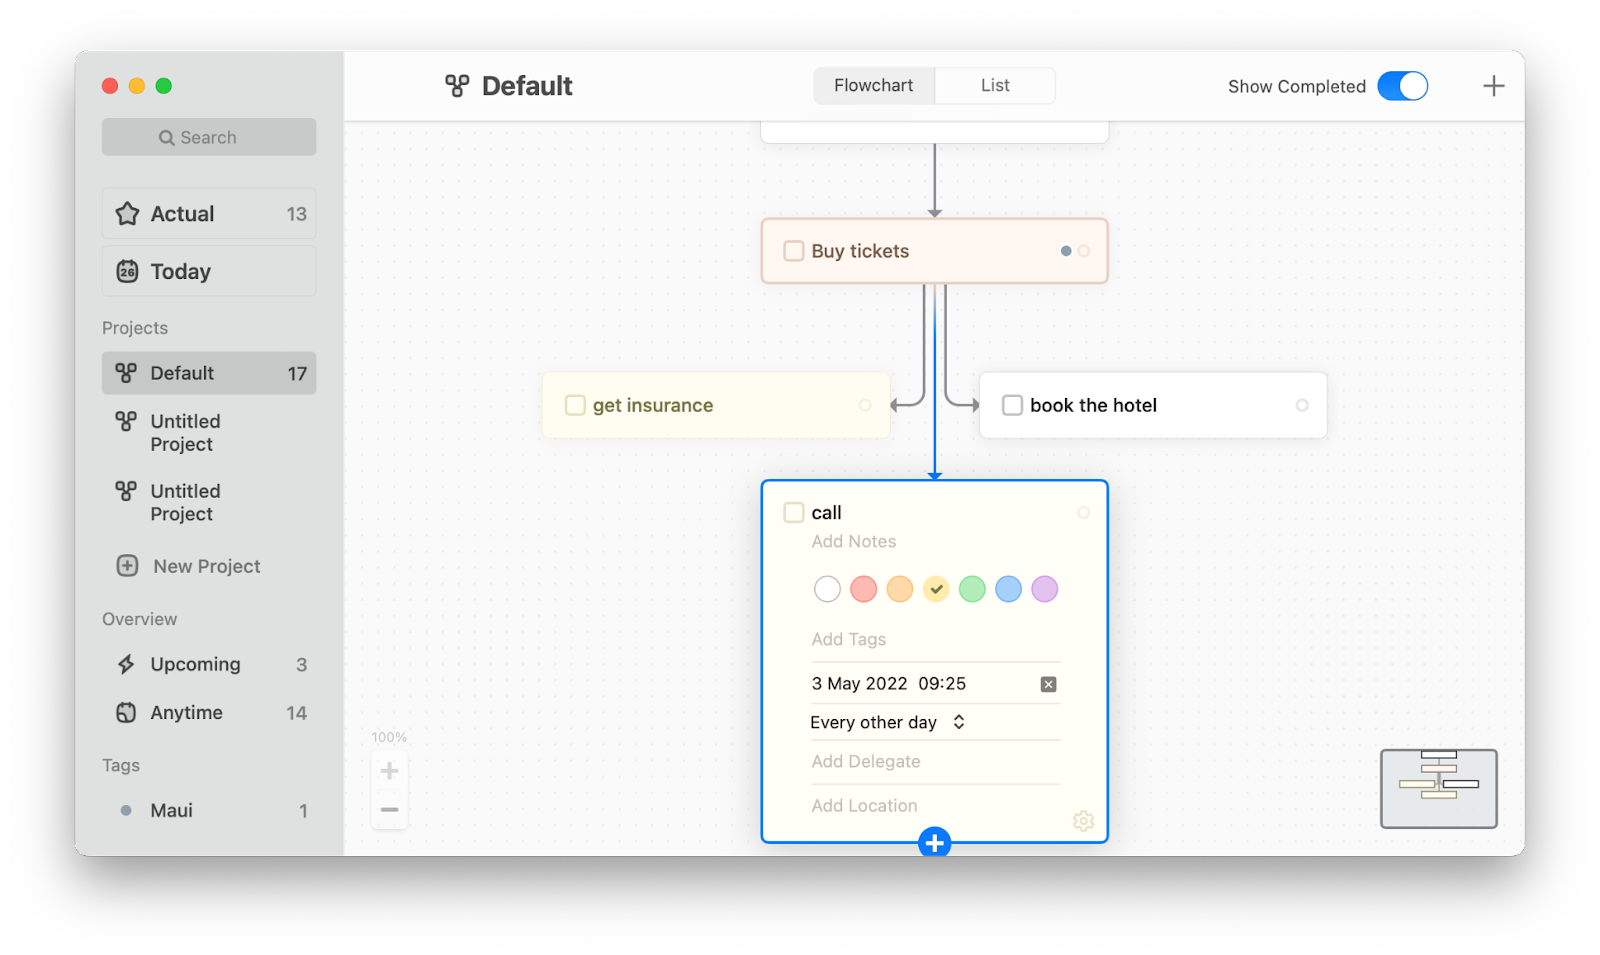 make a flowchart out of the tasks with Taskheat app